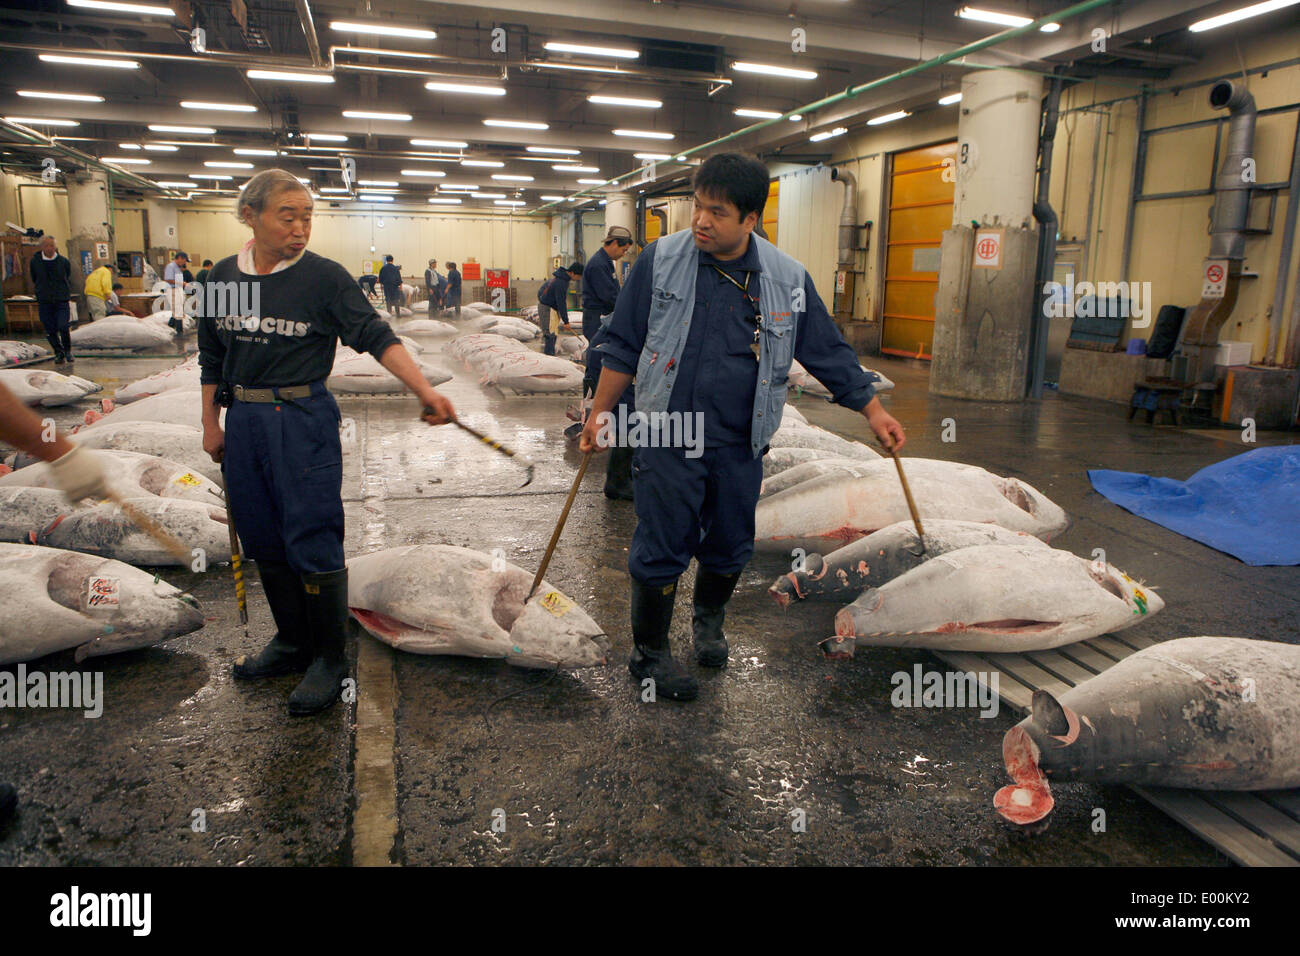 The Tokyo Metropolitan Central Wholesale Market, commonly known as the Tsukiji Market, is the largest wholesale fish and seafood Stock Photo